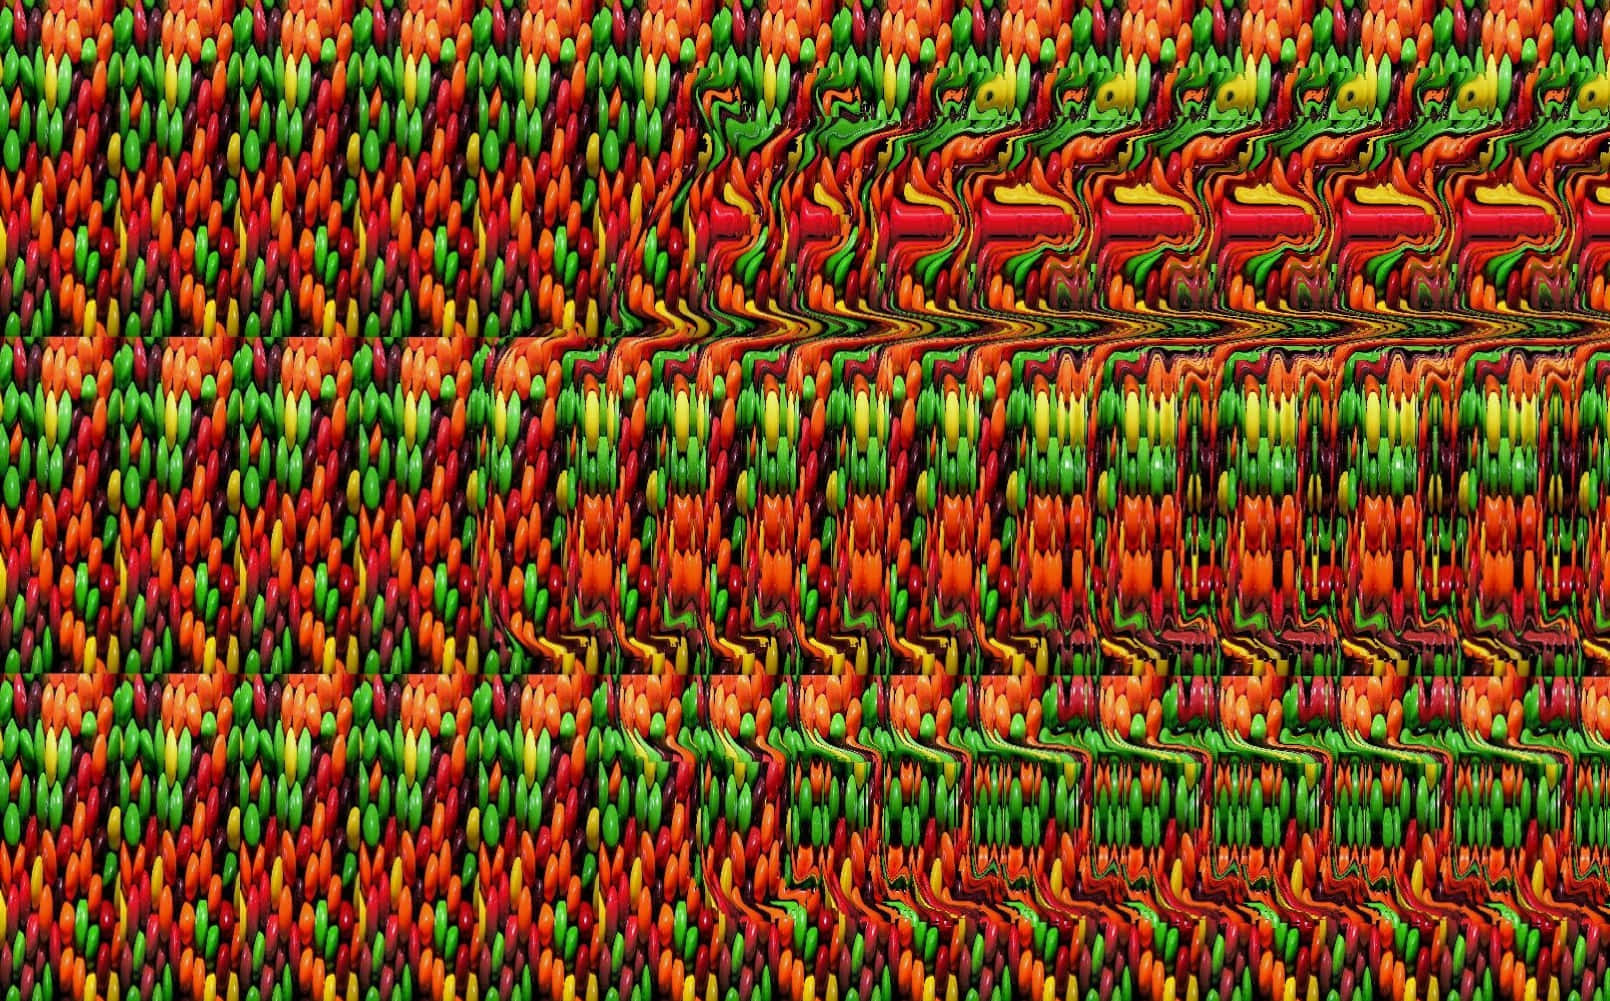 Abstract Glitch Pattern Magic Eye 3D Stereogram Picture a colorful abstract pattern of red, green and yellow